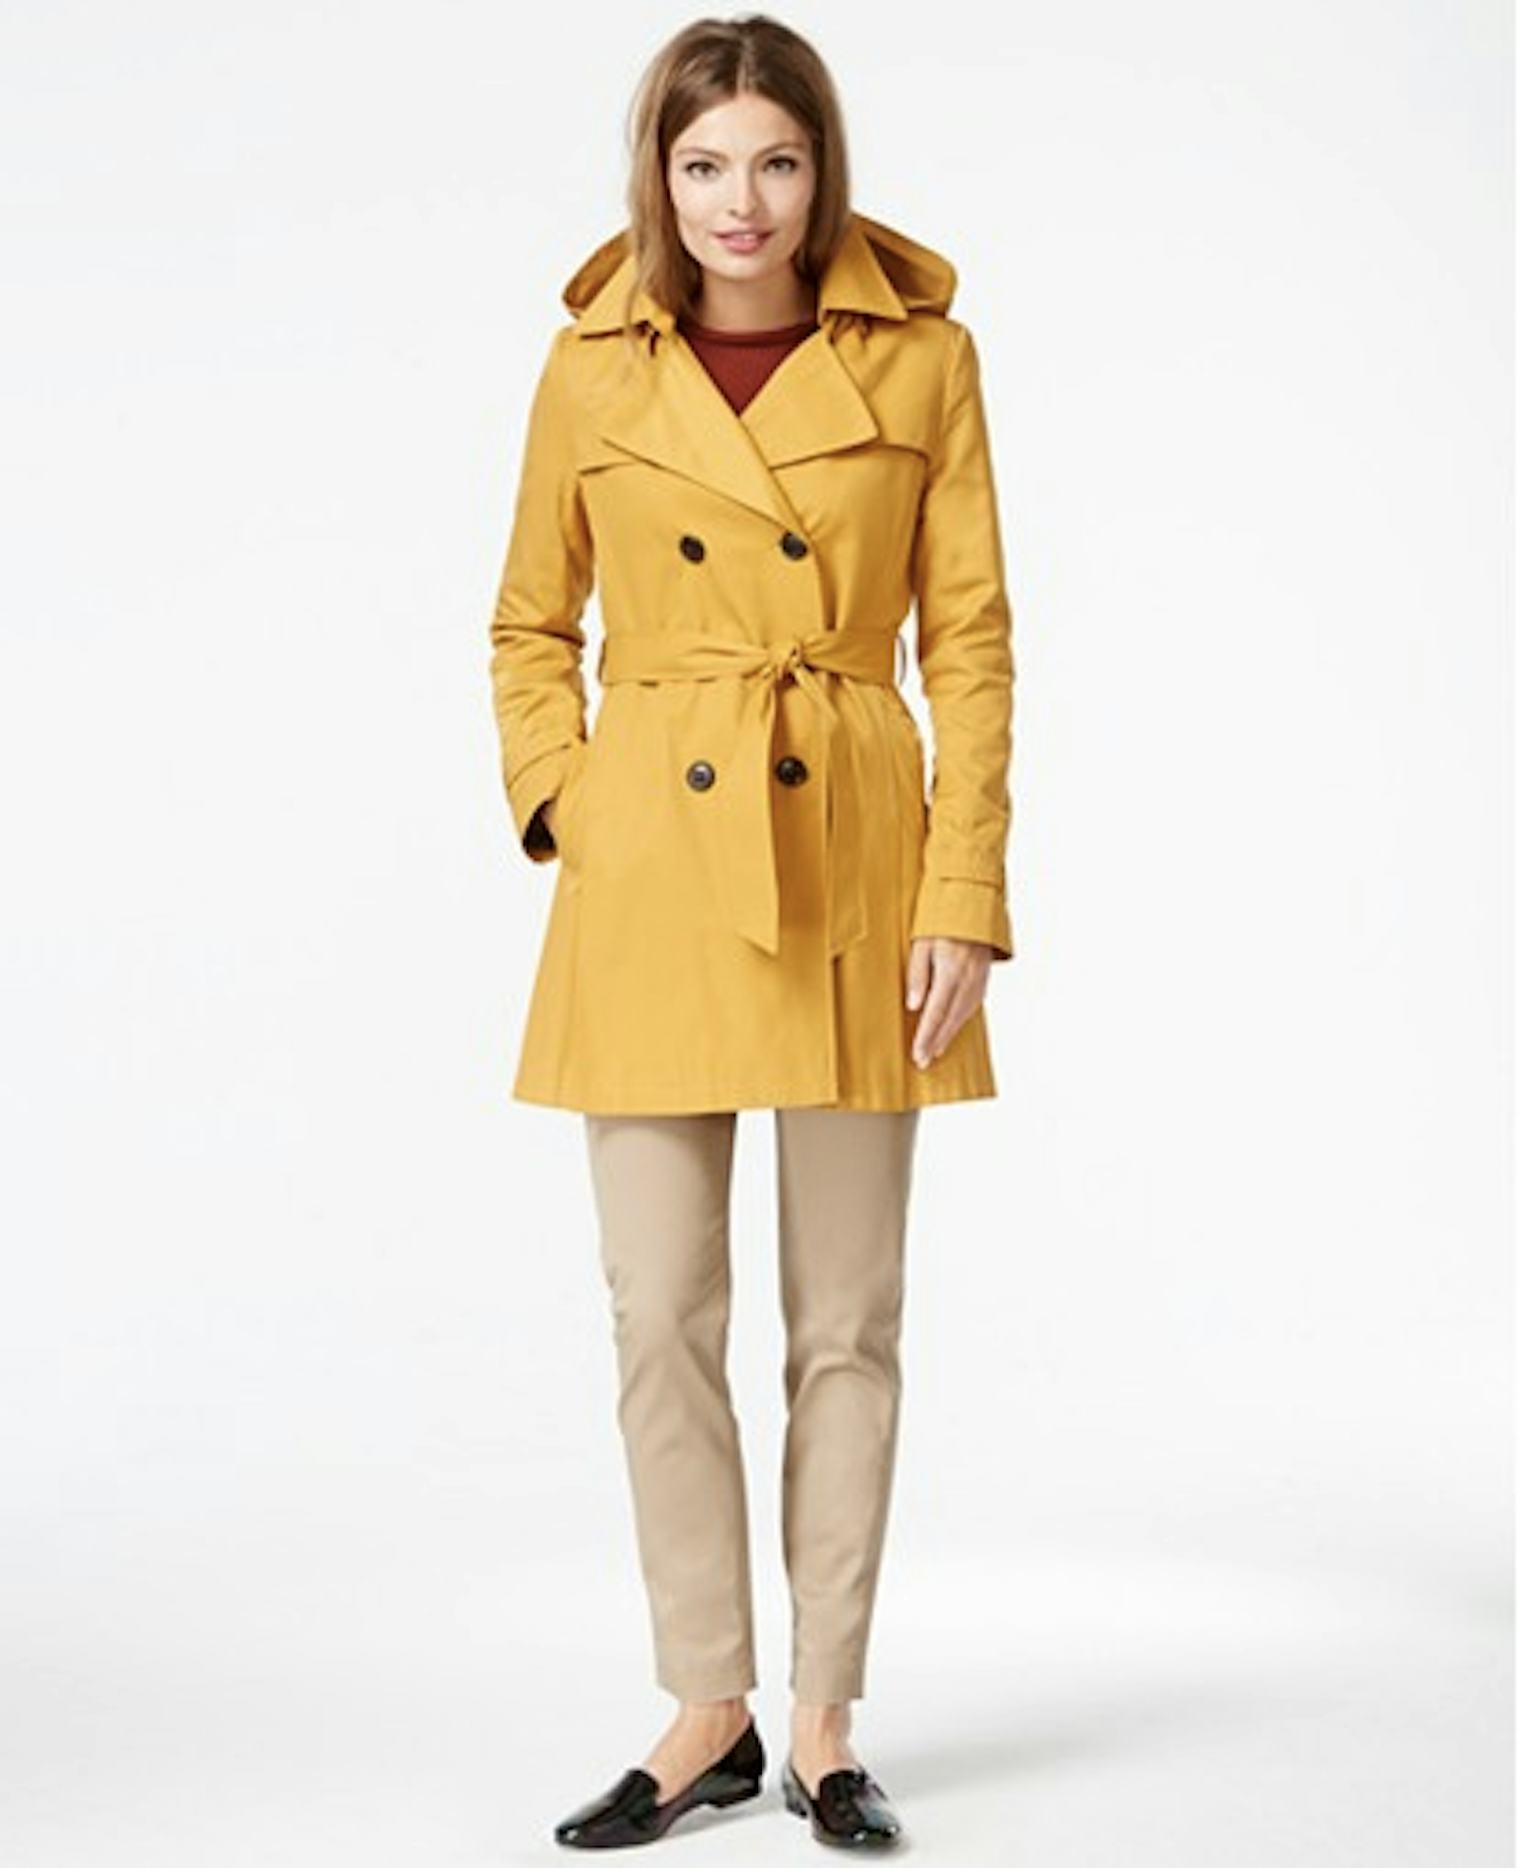 13 Stylish Raincoats & Trench Coats To Get You Through Fall